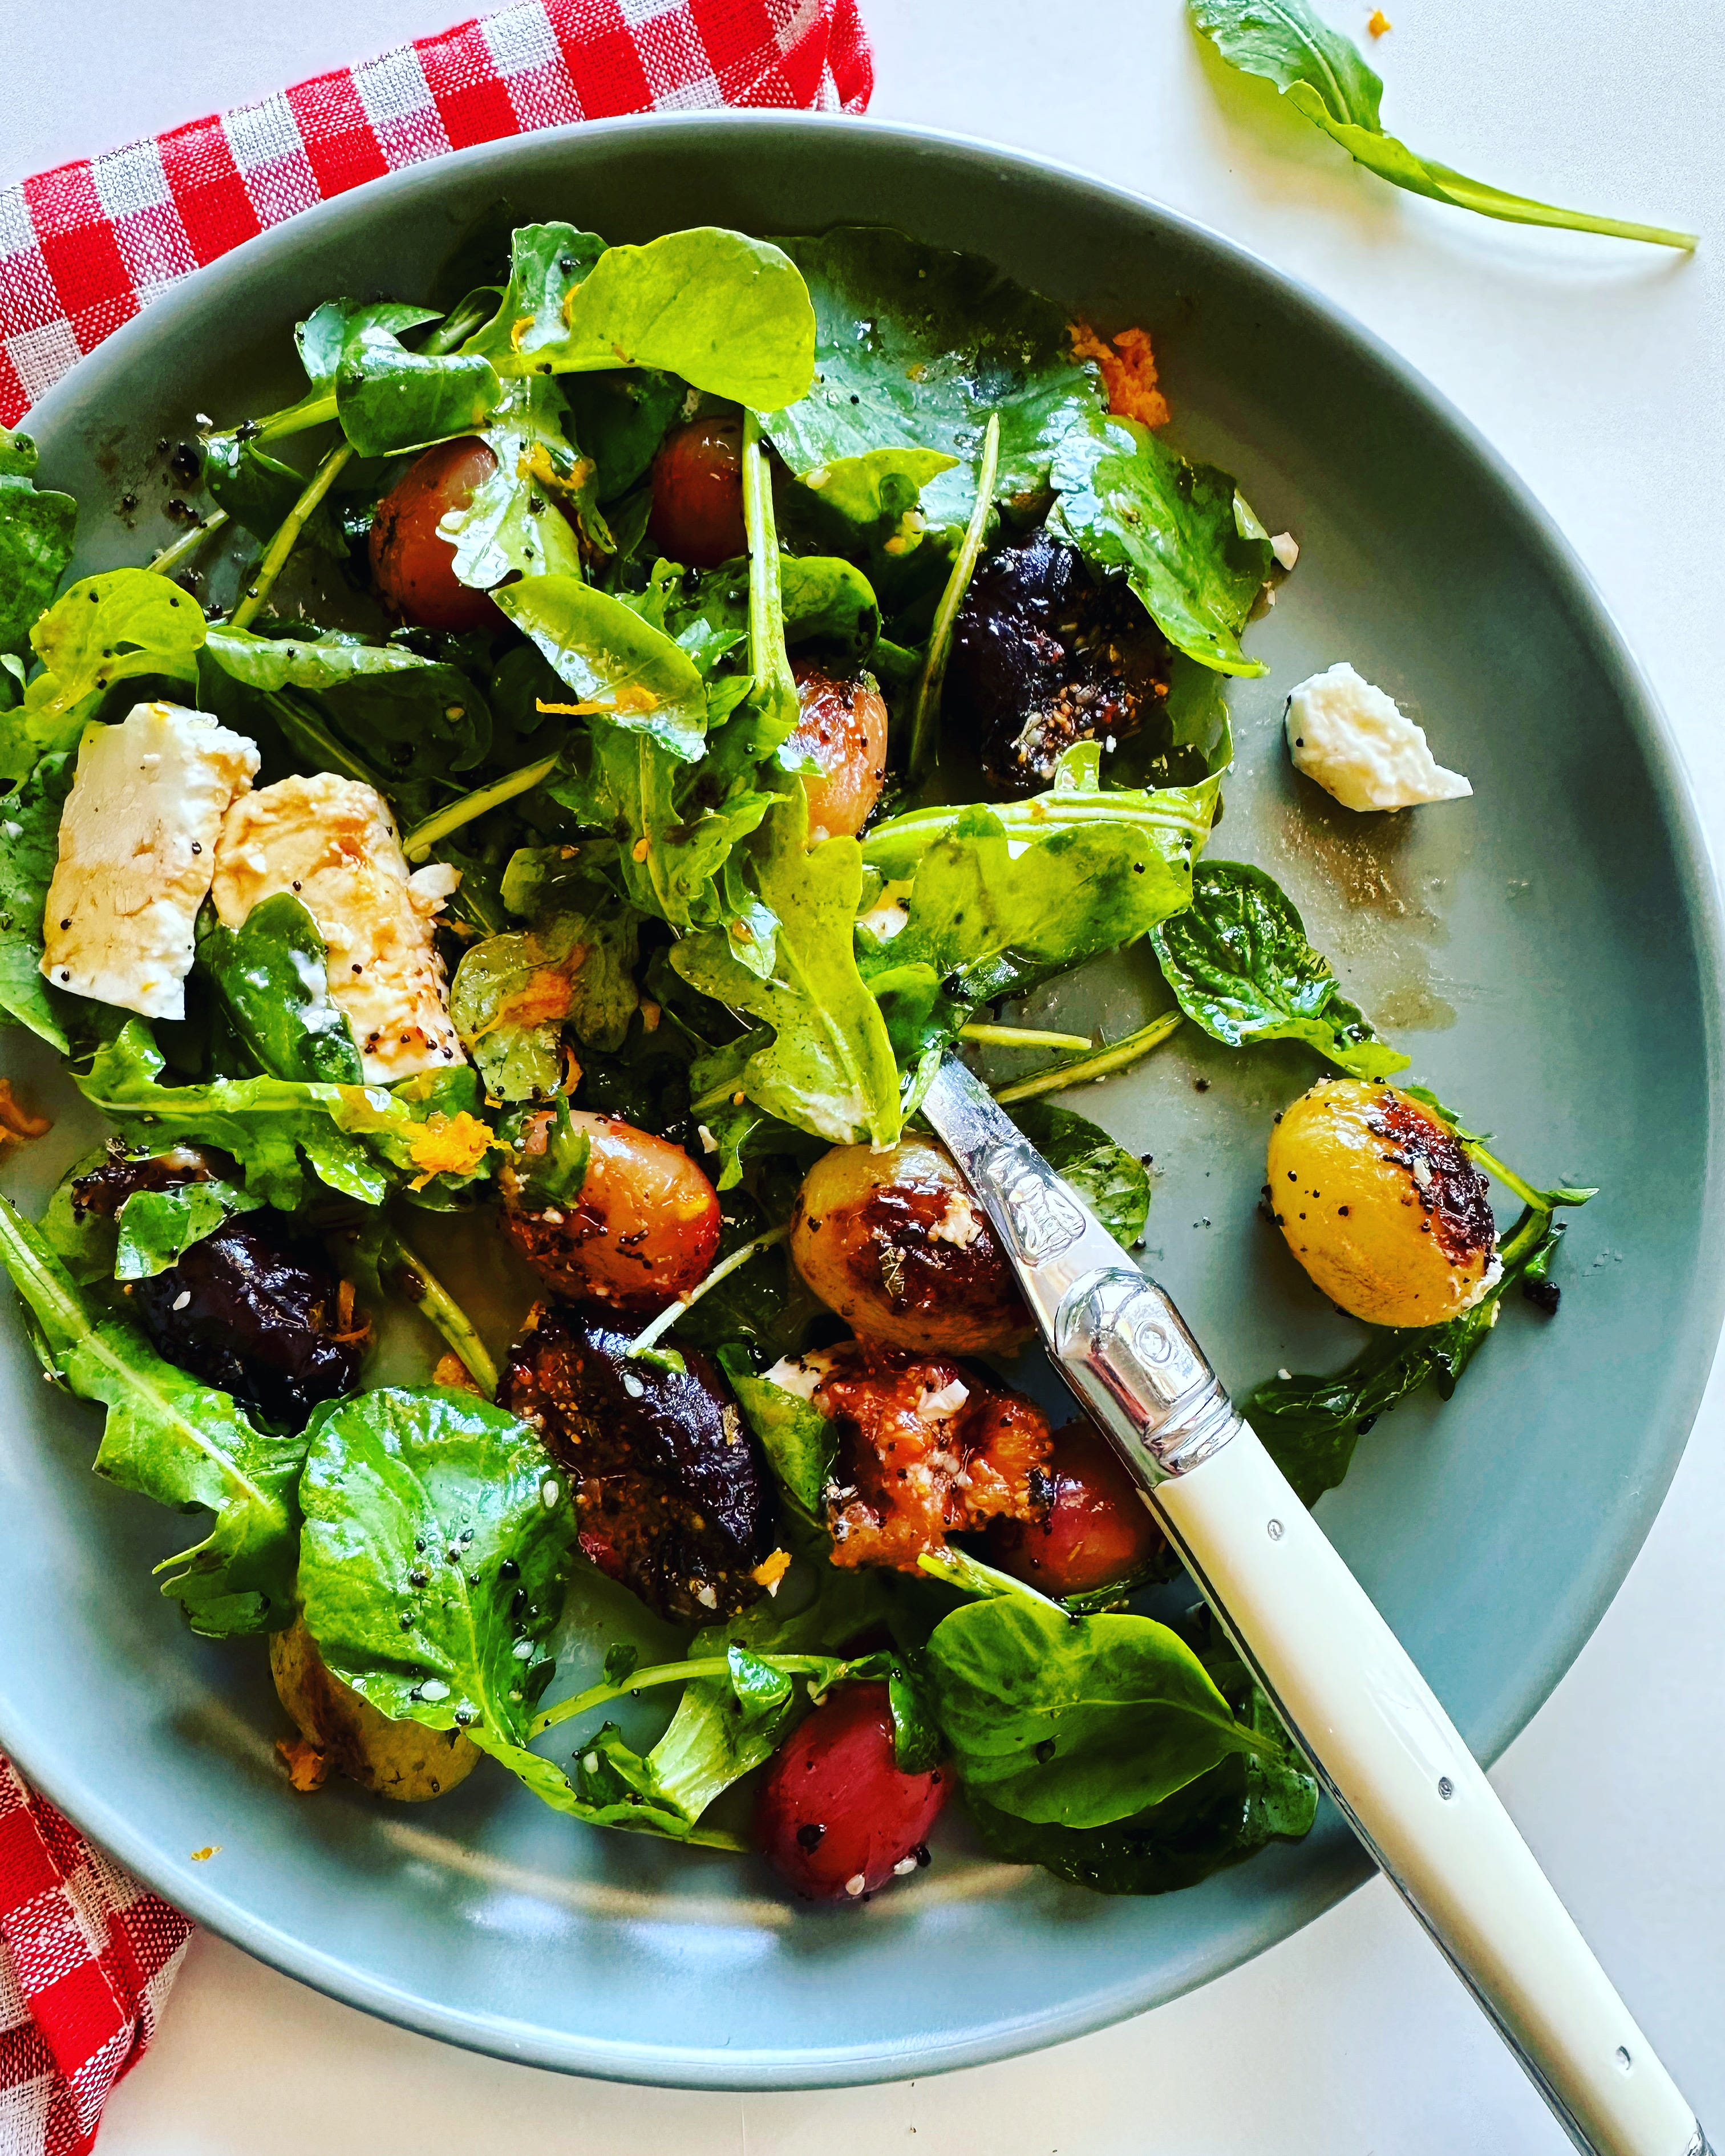 Exciting Salads from an Exciting New Cookbook